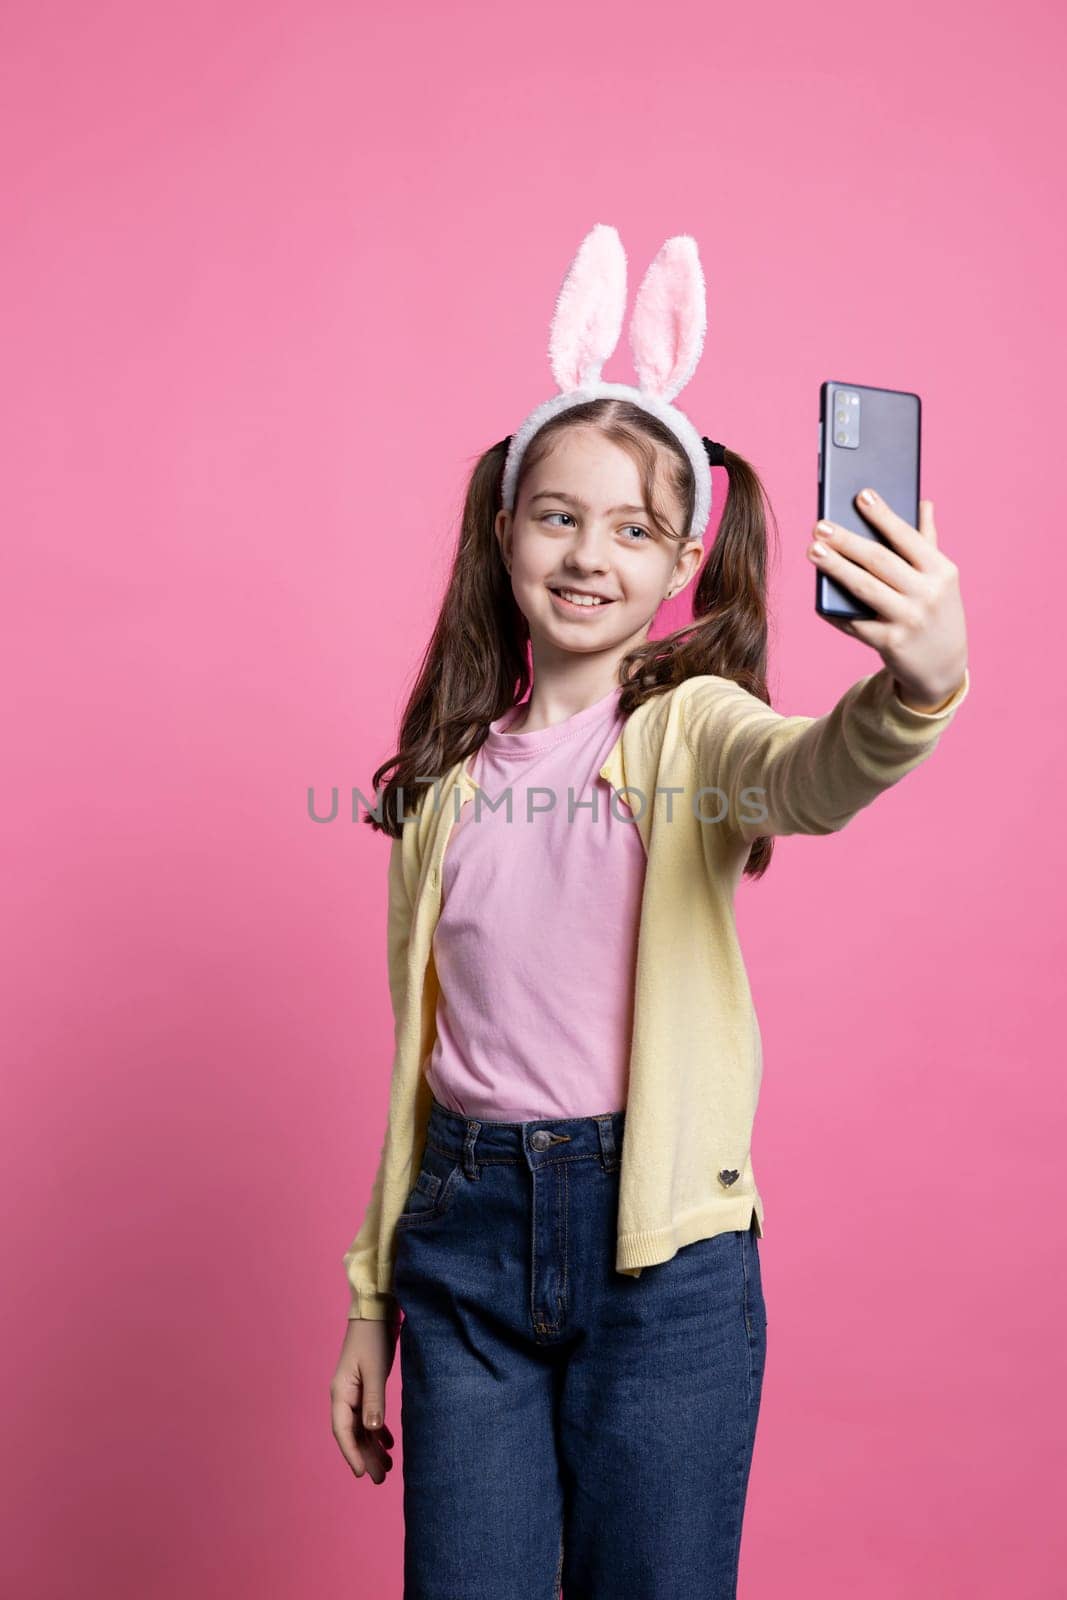 Young excited little kid taking photographs with her phone on camera, smiling in studio and posing against pink background. Positive joyful child takes pictures for easter holiday event.